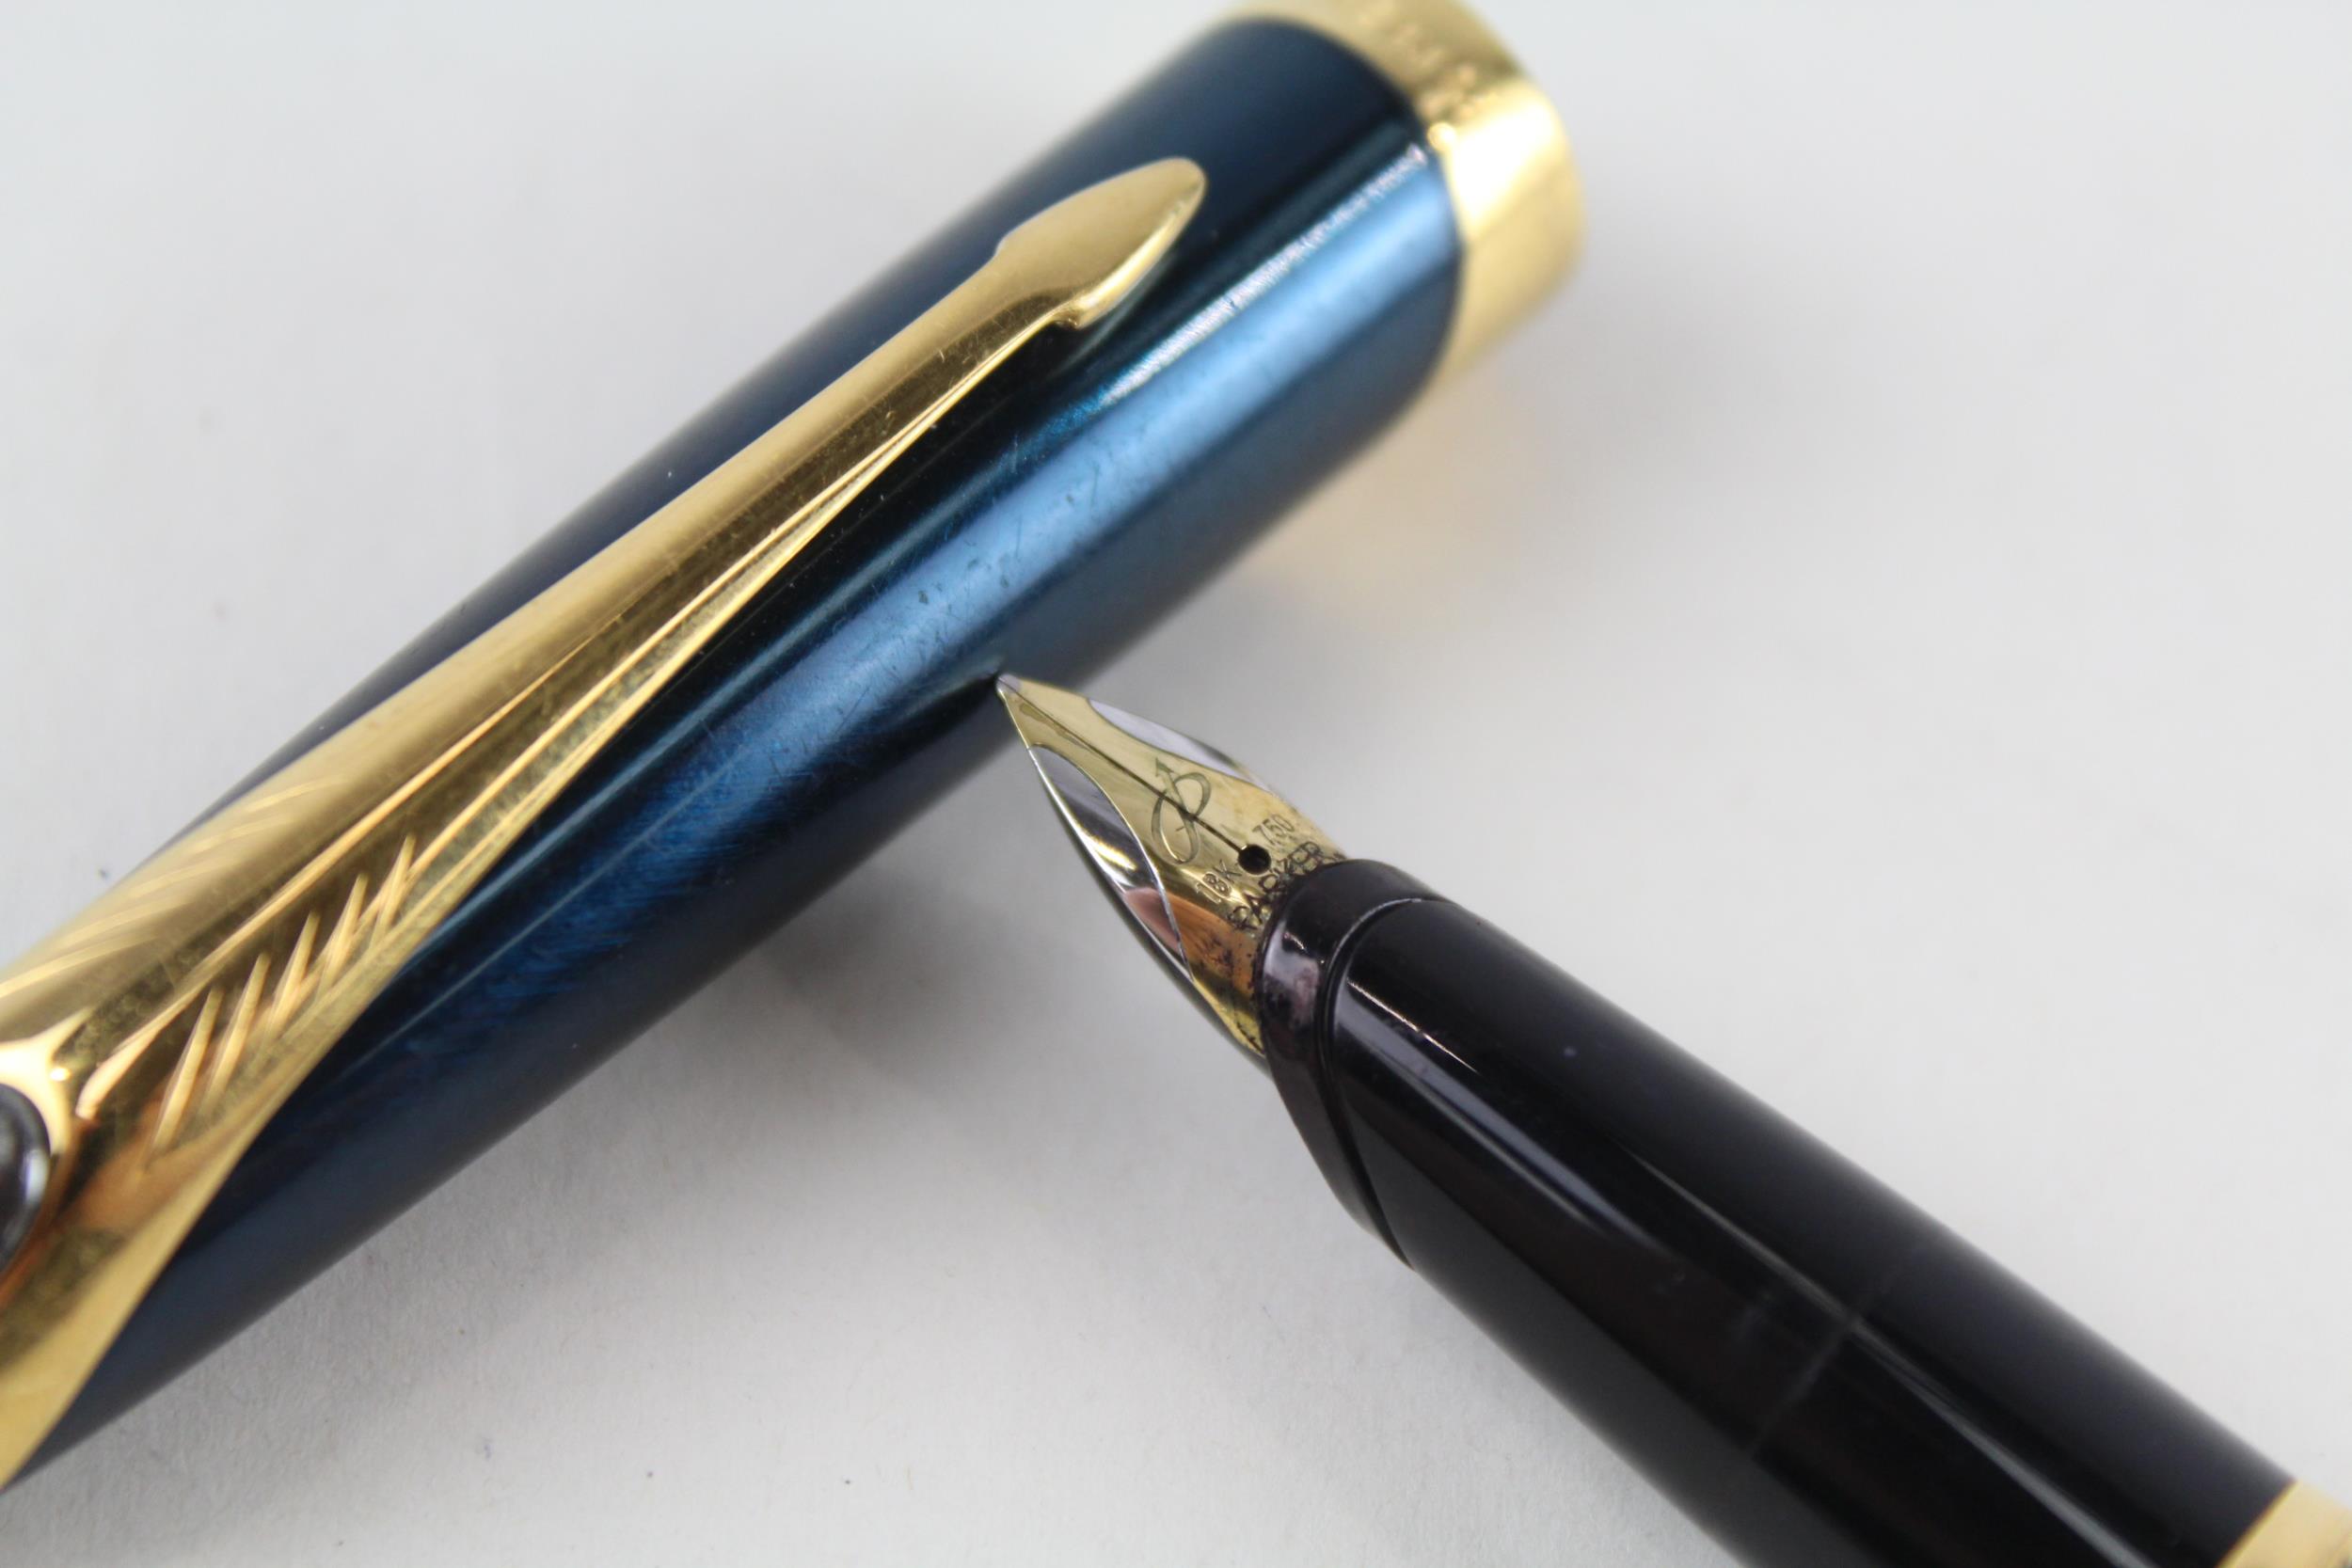 PARKER IM Metallic Teal Fountain Pen w/ 18ct Gold Nib WRITING - Dip Tested & WRITING In previously - Image 4 of 6